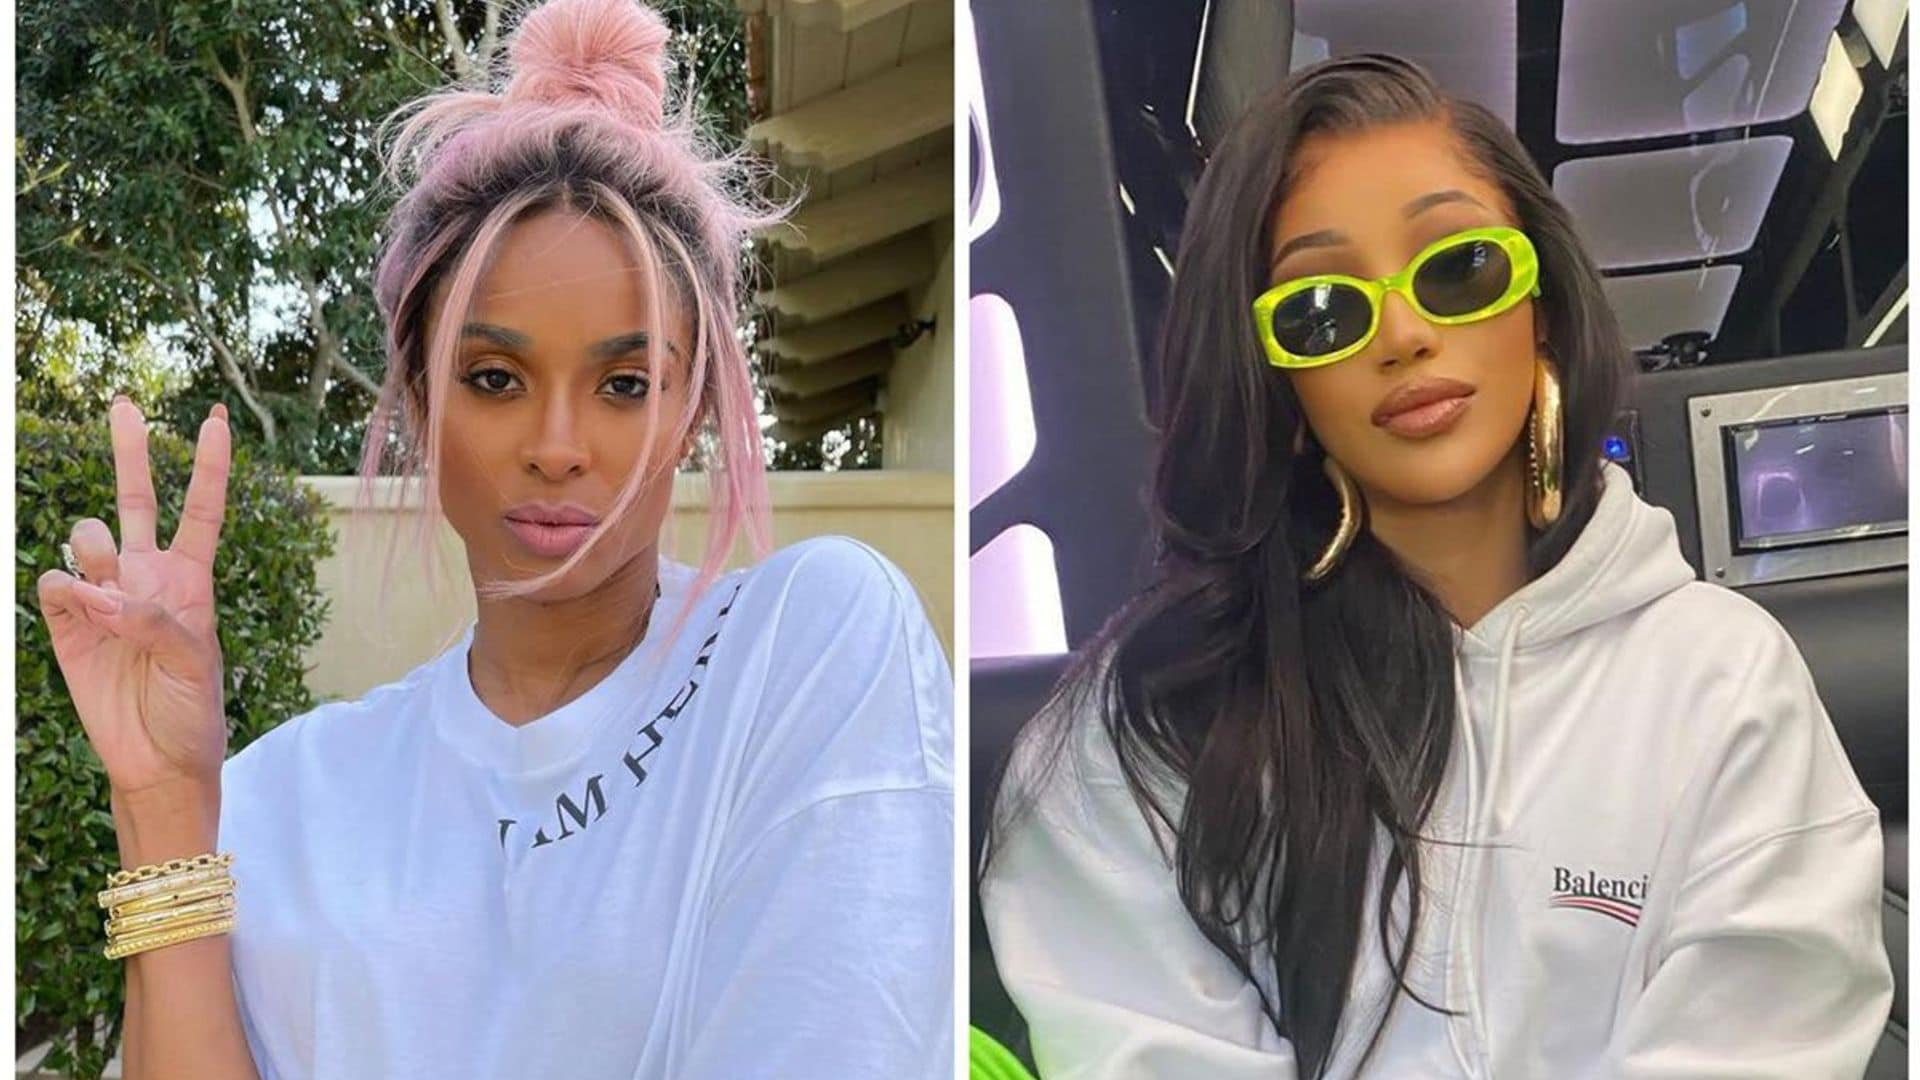 Did Ciara do a better job than Cardi B at her own ‘Up’ challenge?